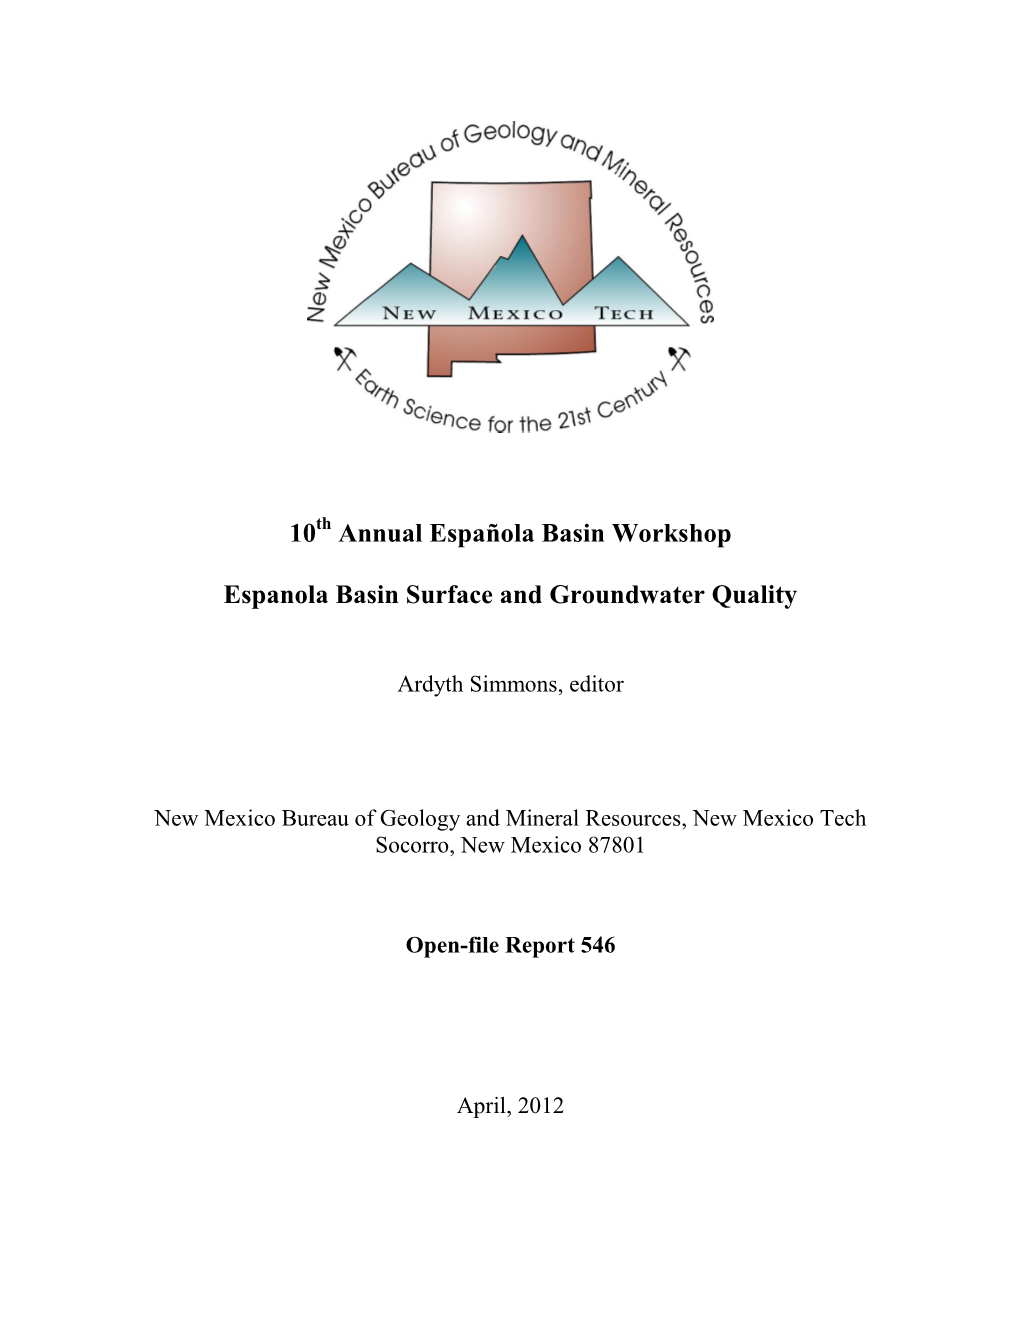 Española Basin Surface and Groundwater Quality